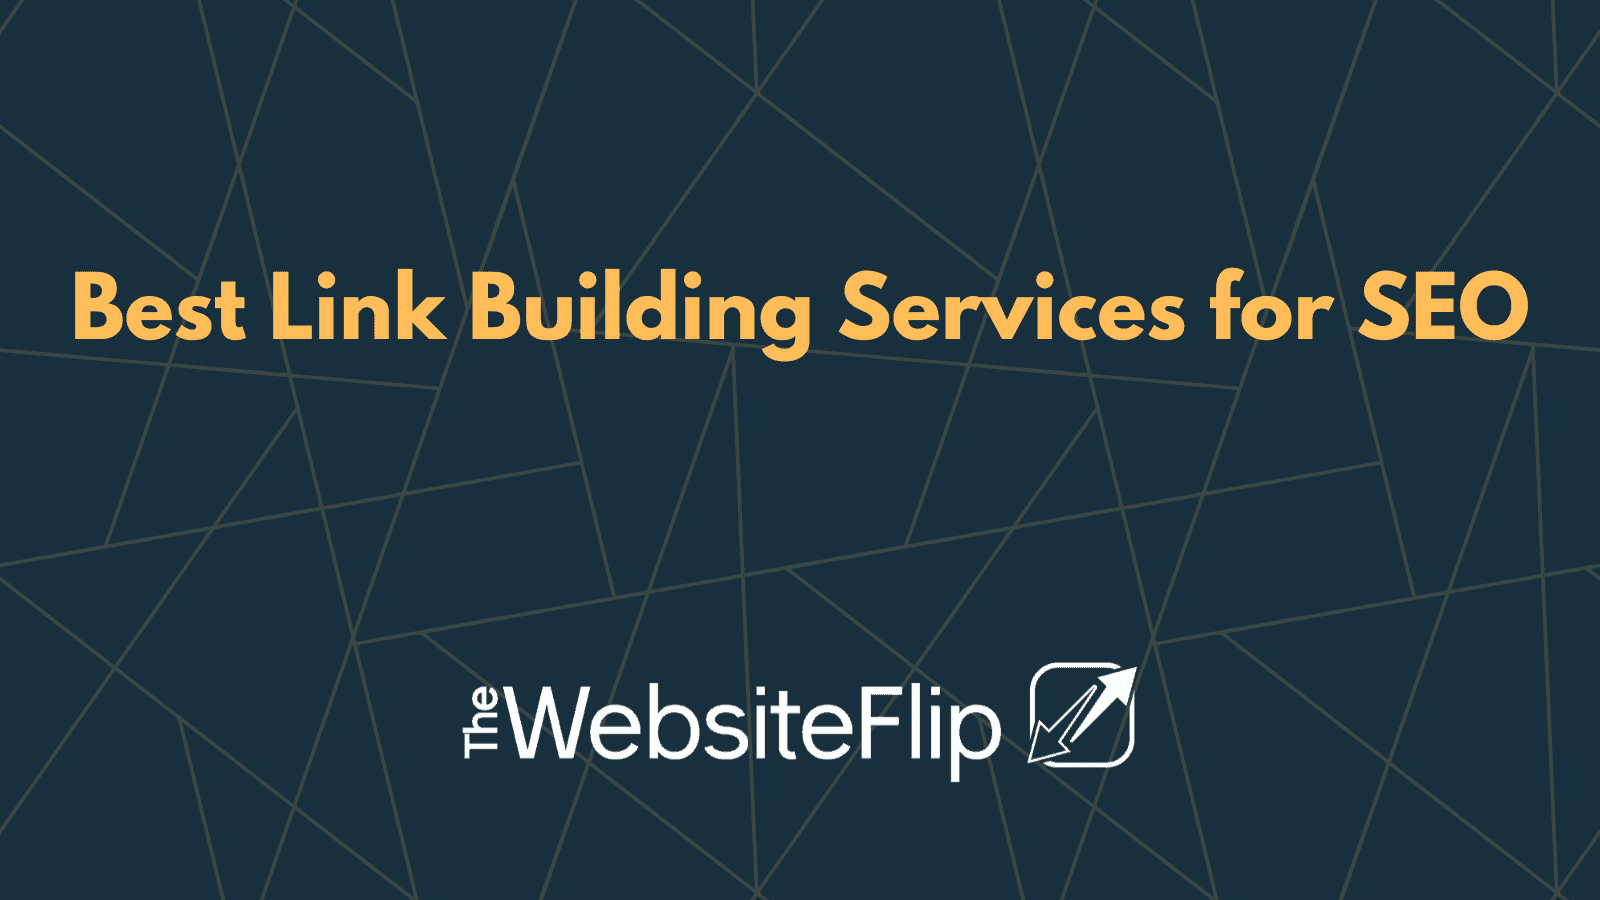 Best Link Building Services for SEO